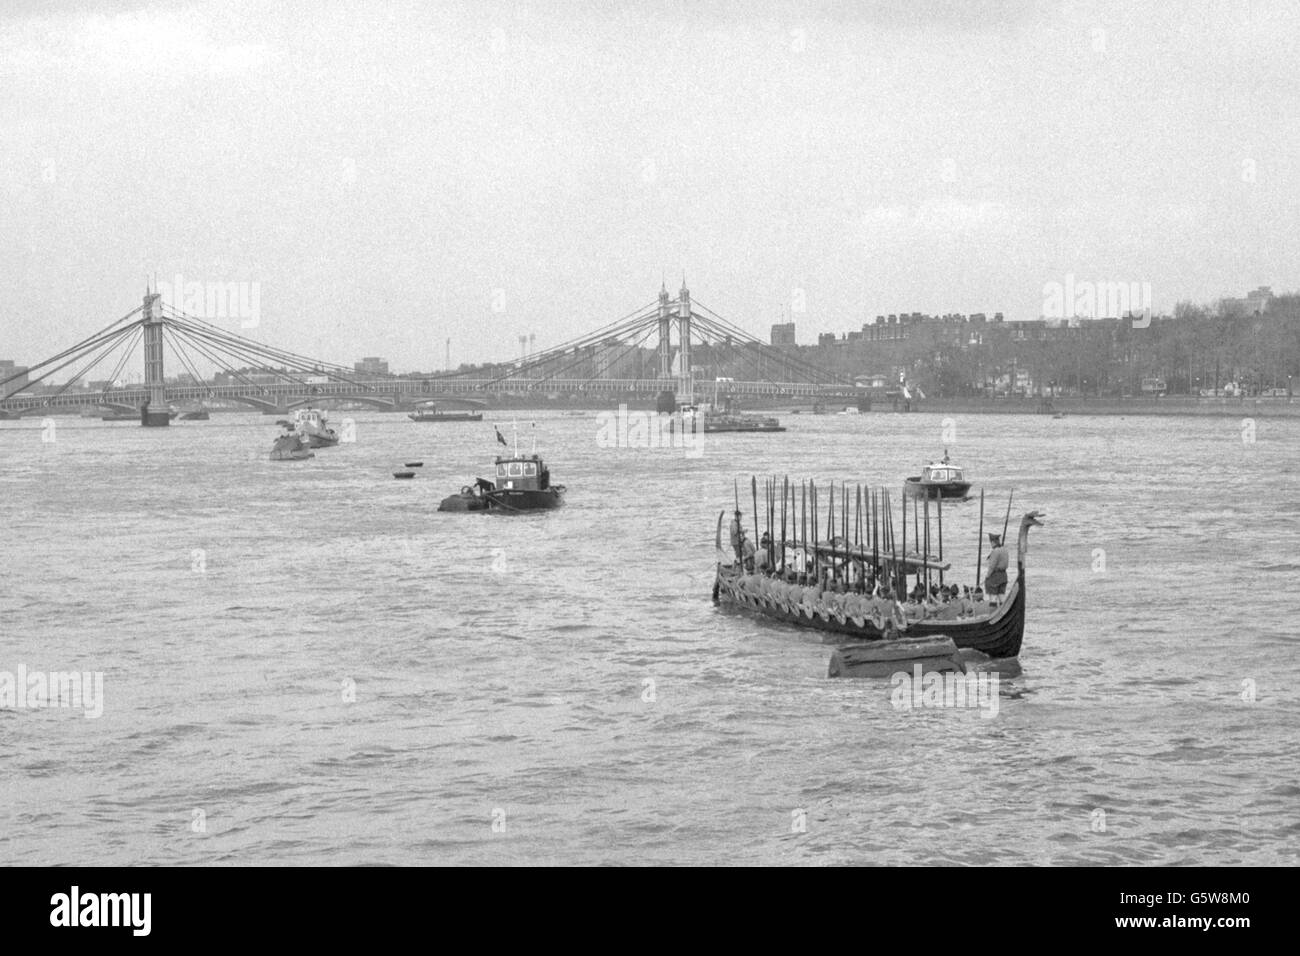 Rare Victorian elegance, the Albert suspension bridge and second oldest surviving bridge in London, forms the background for today's friendly invasion by a troop of Danish Boy Scouts. They are sailing up the River Thames to Battersea Park in a IMME GRAM (foreground), a 71-foot full-scale replica of a Viking longship, which they built under the direction of their scoutmaster, Mr T. Harvig Nielsen. The scouts rowed the vessel up the Thames from Tower Pier to Battersea Pier for the inaugural luncheon of the 'At Home With The Danes' exhibition. The last time a Viking longship came up London's Stock Photo